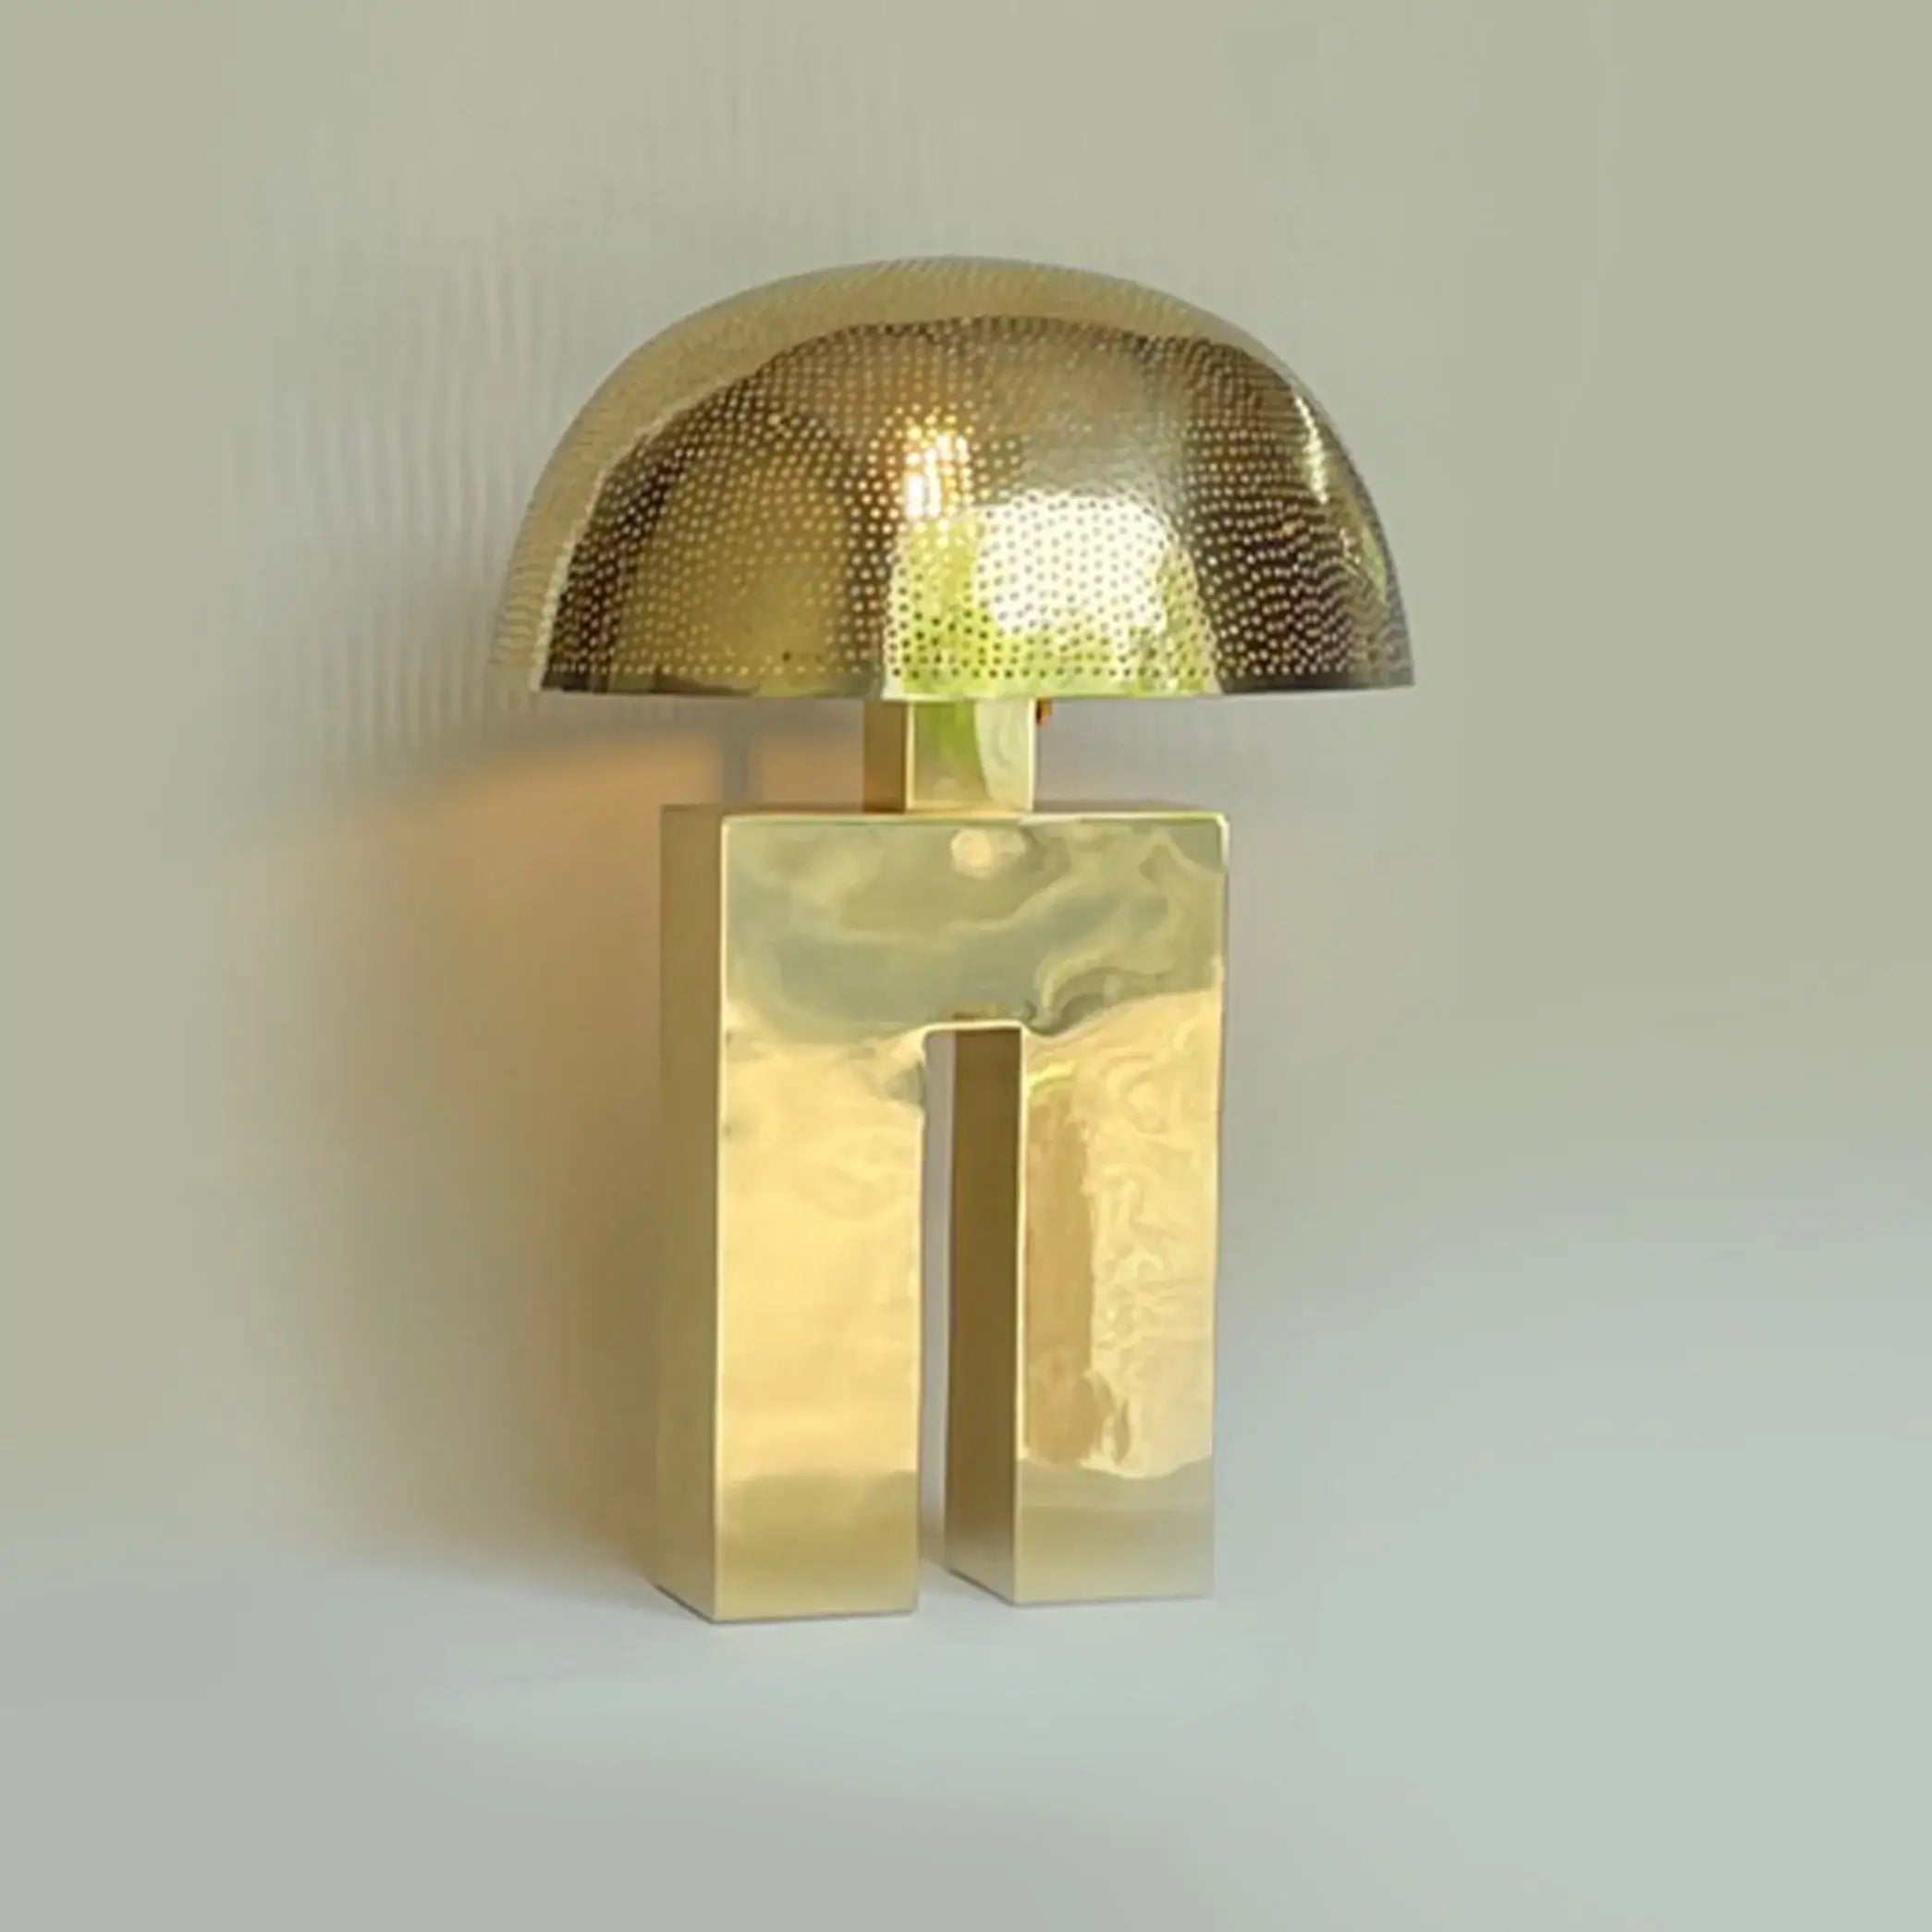 Dounia home Mushroom Table lamp in polished brass  metal  made of Metal, Model: Amur